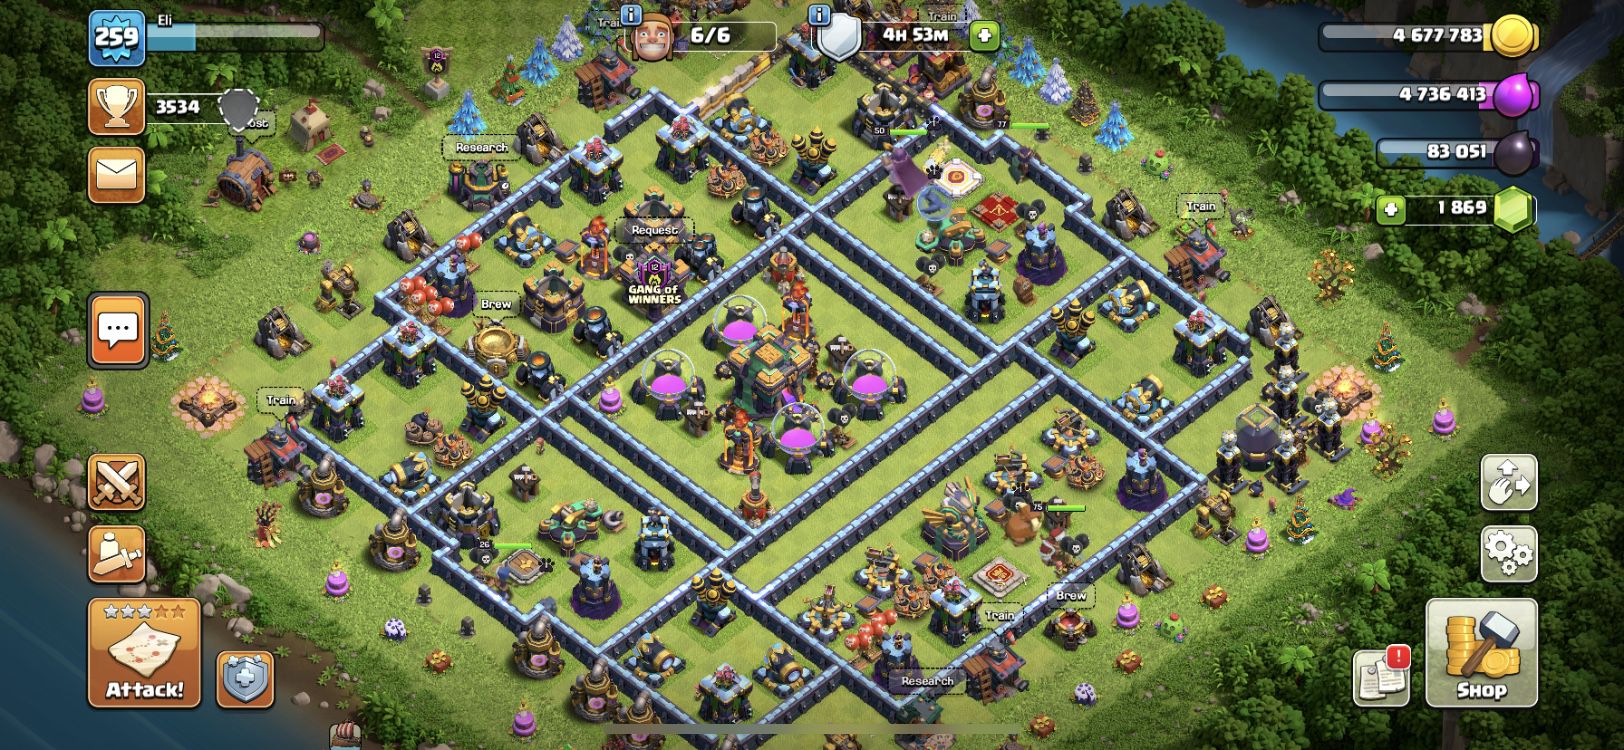 Th14 Clash Of Clans account